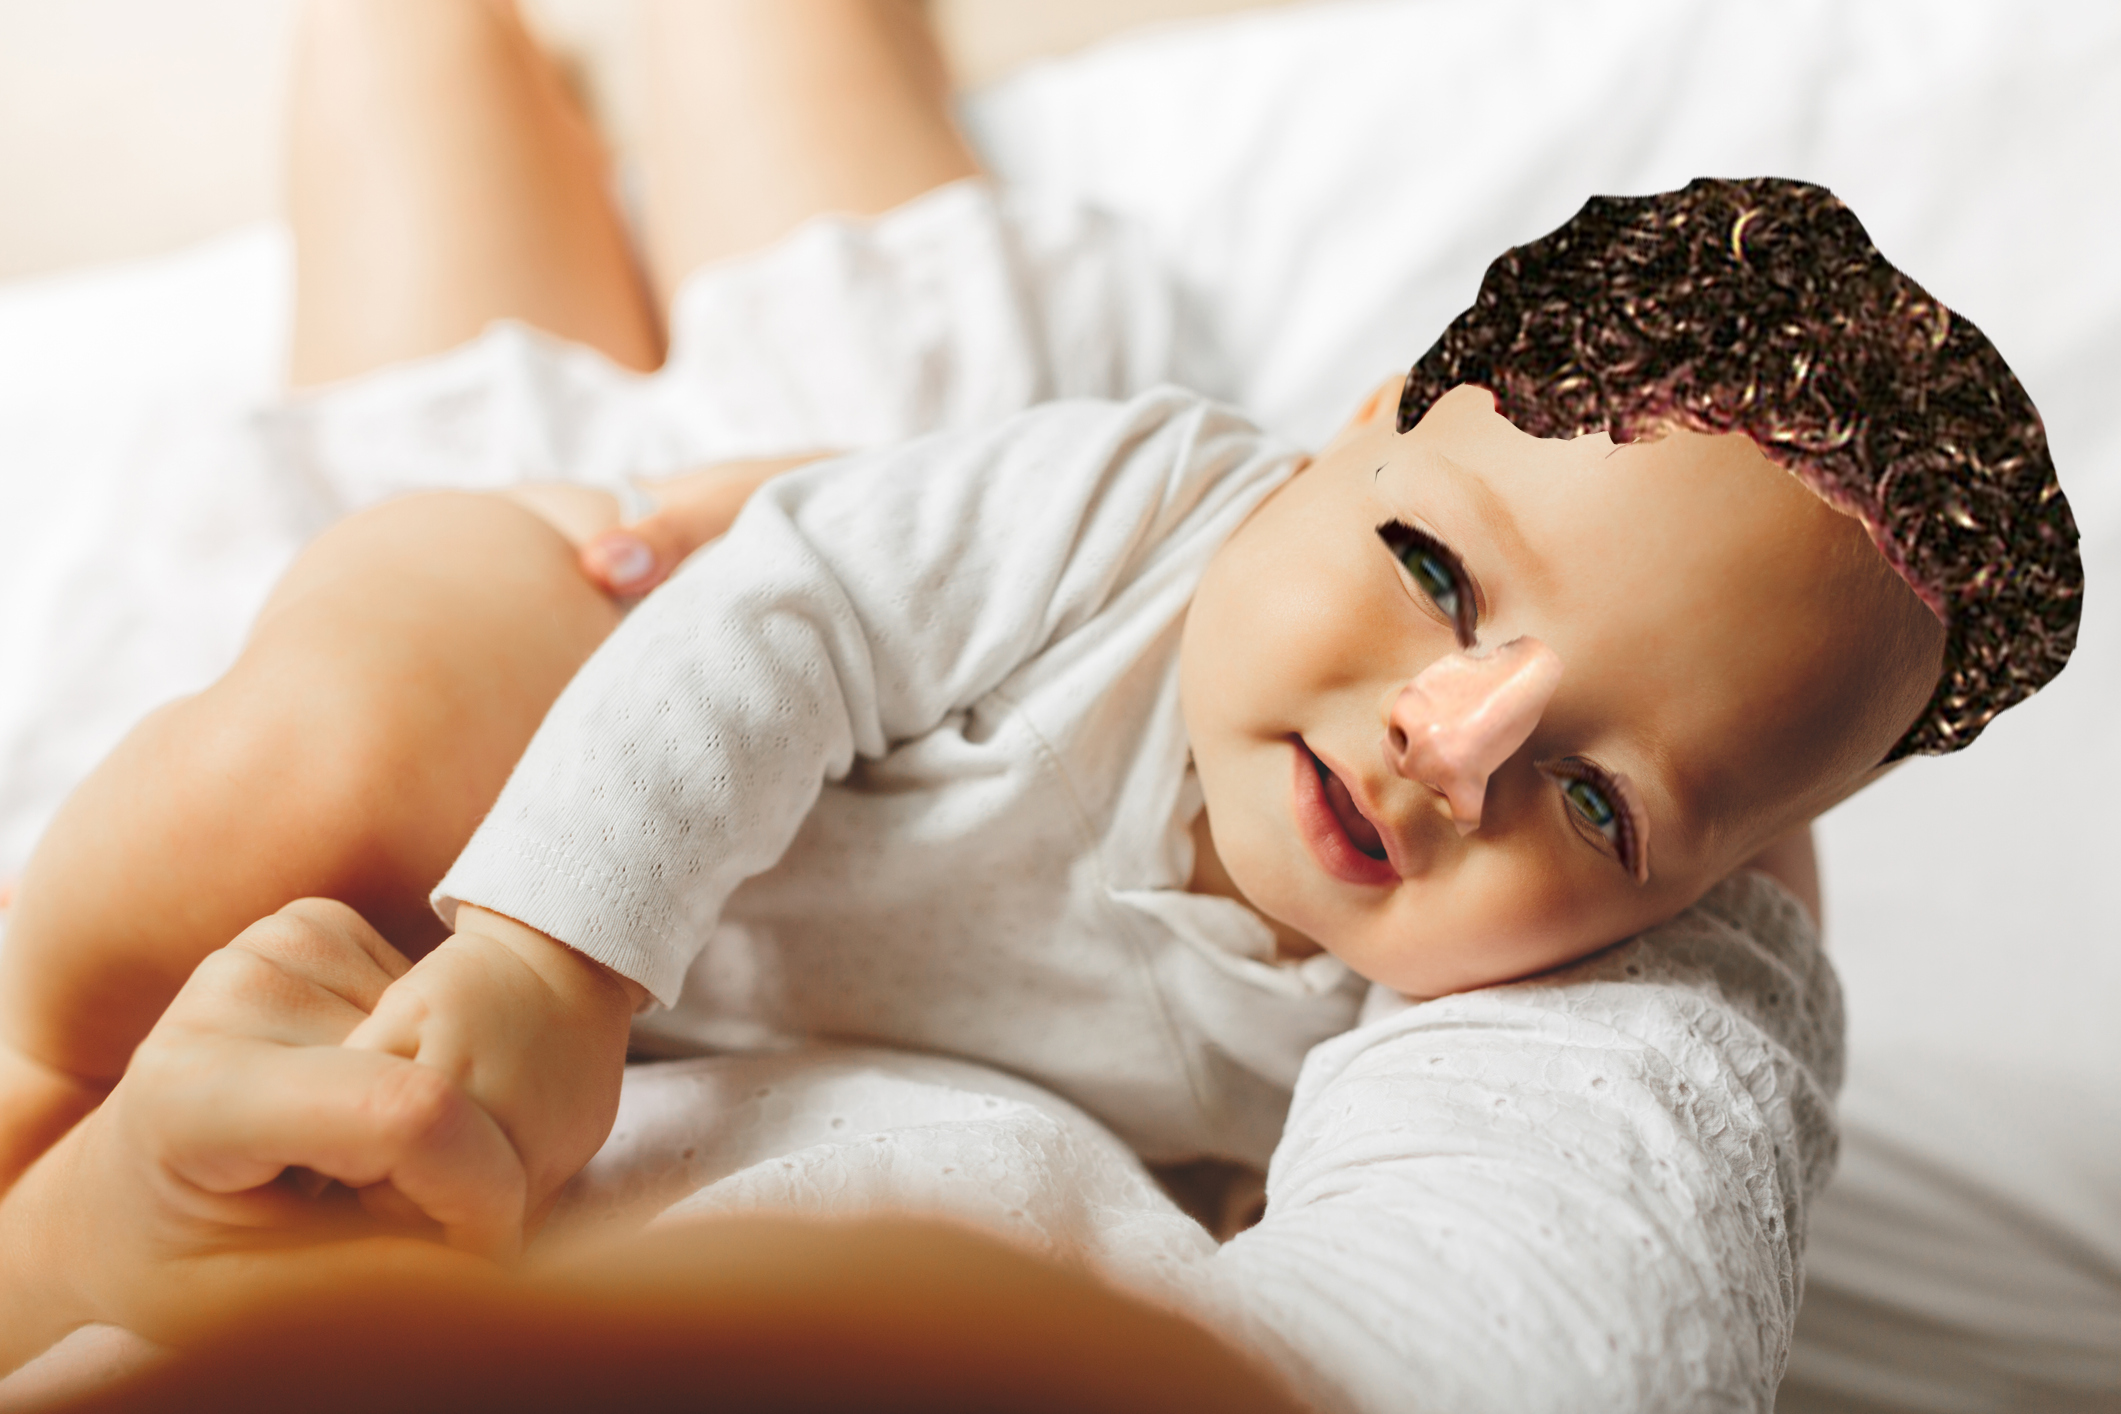 A poorly photoshopped baby with Jessica and Justin&#x27;s features